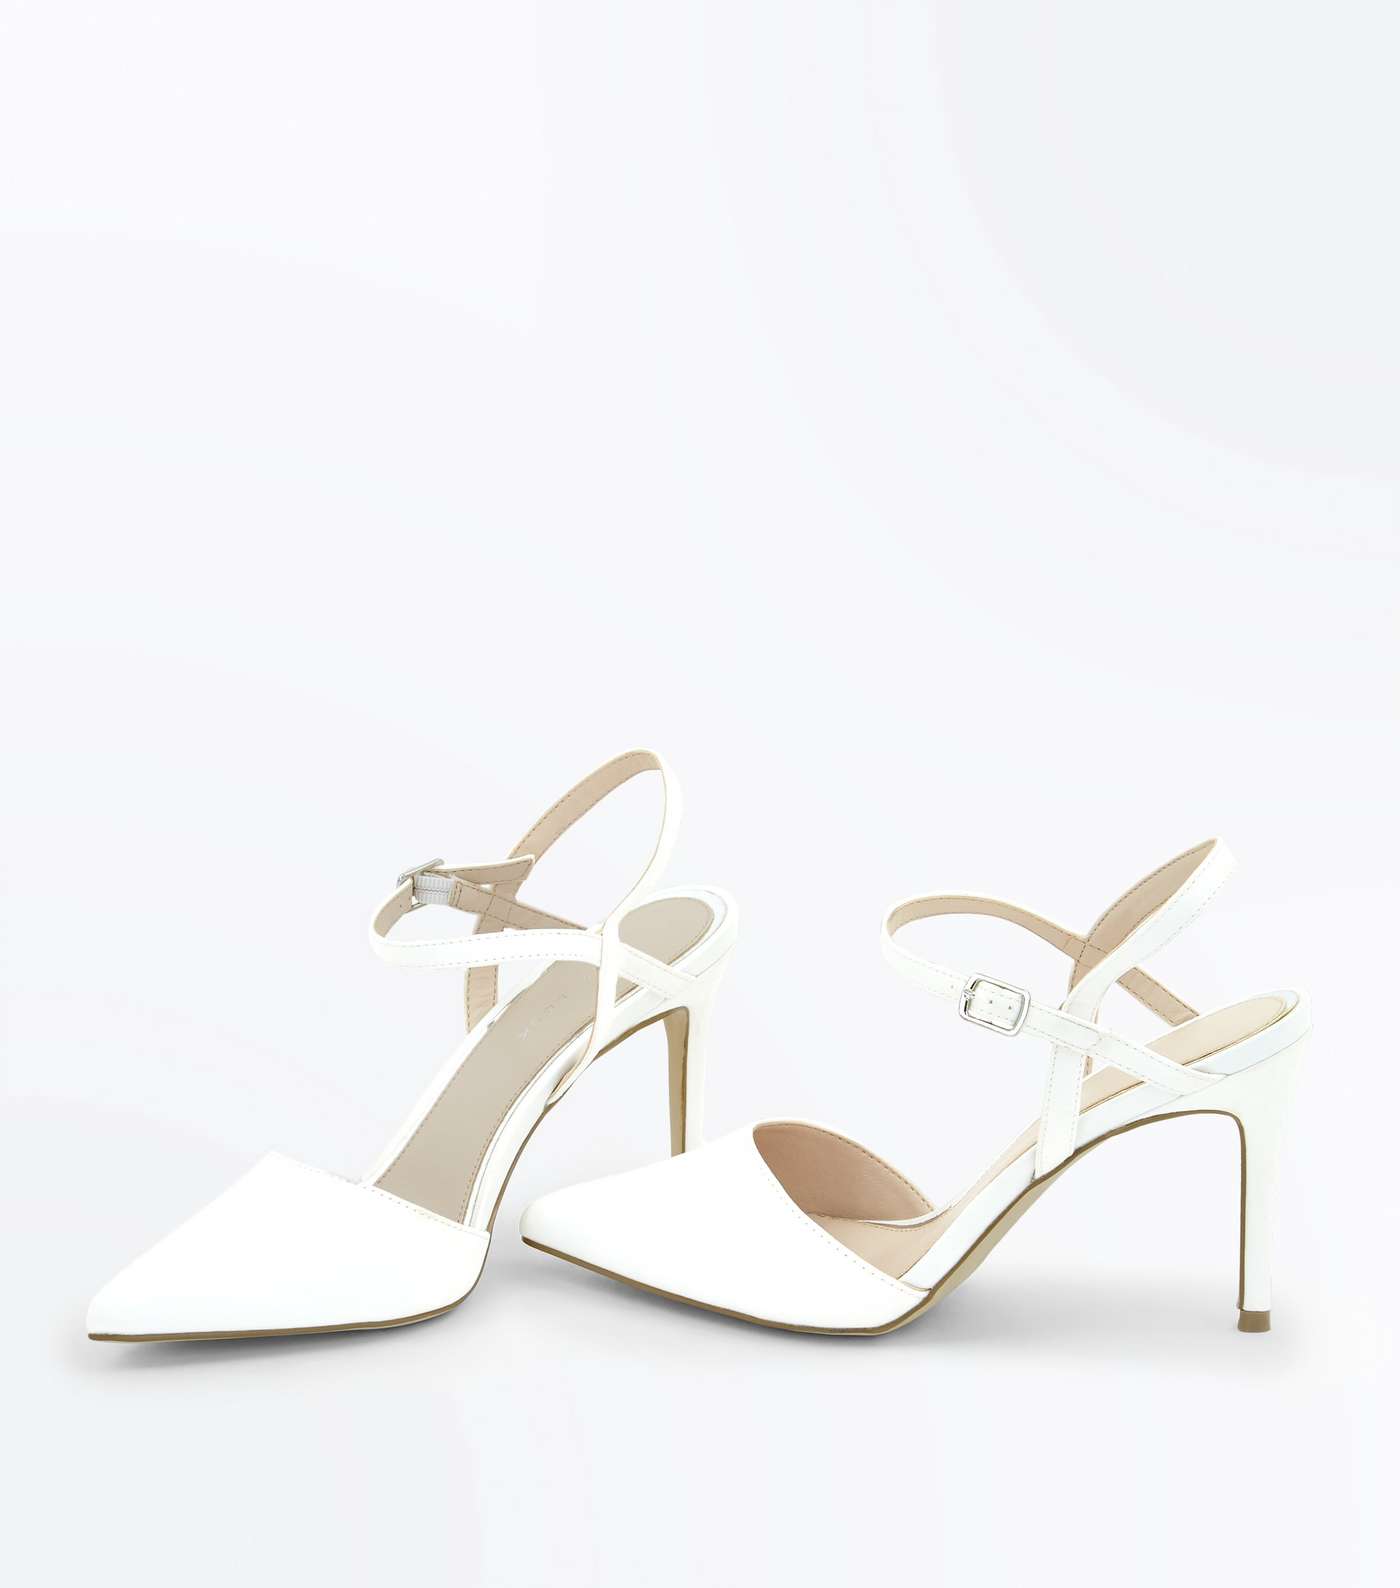 Off White Satin Pointed Wedding Shoes Image 3